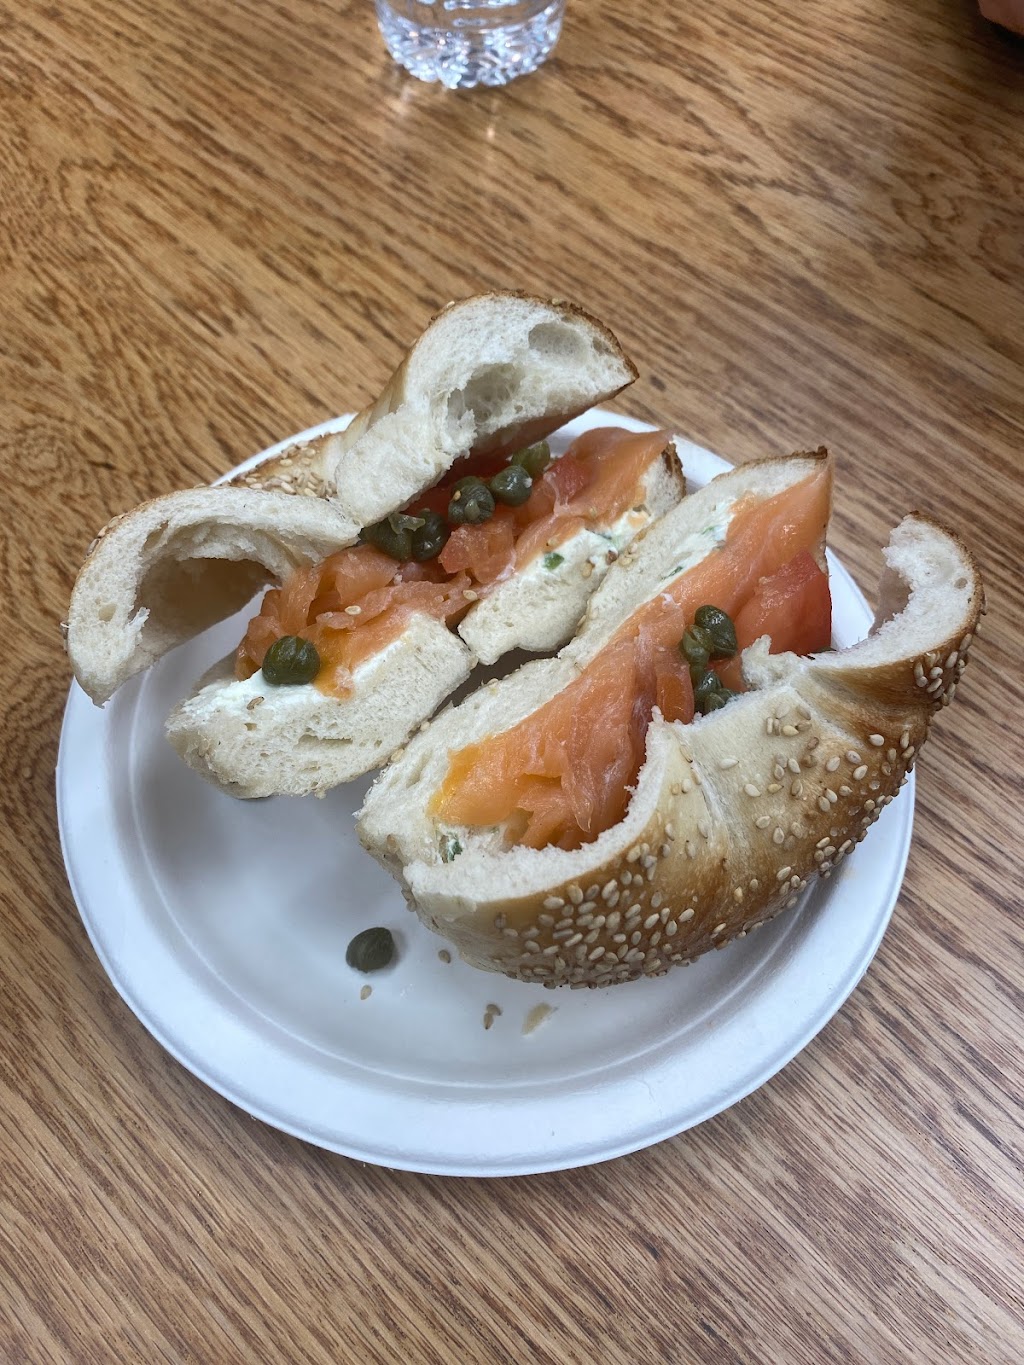 La pizzeria and bagel | 951 Rosedale Rd, Valley Stream, NY 11581 | Phone: (914) 275-0799